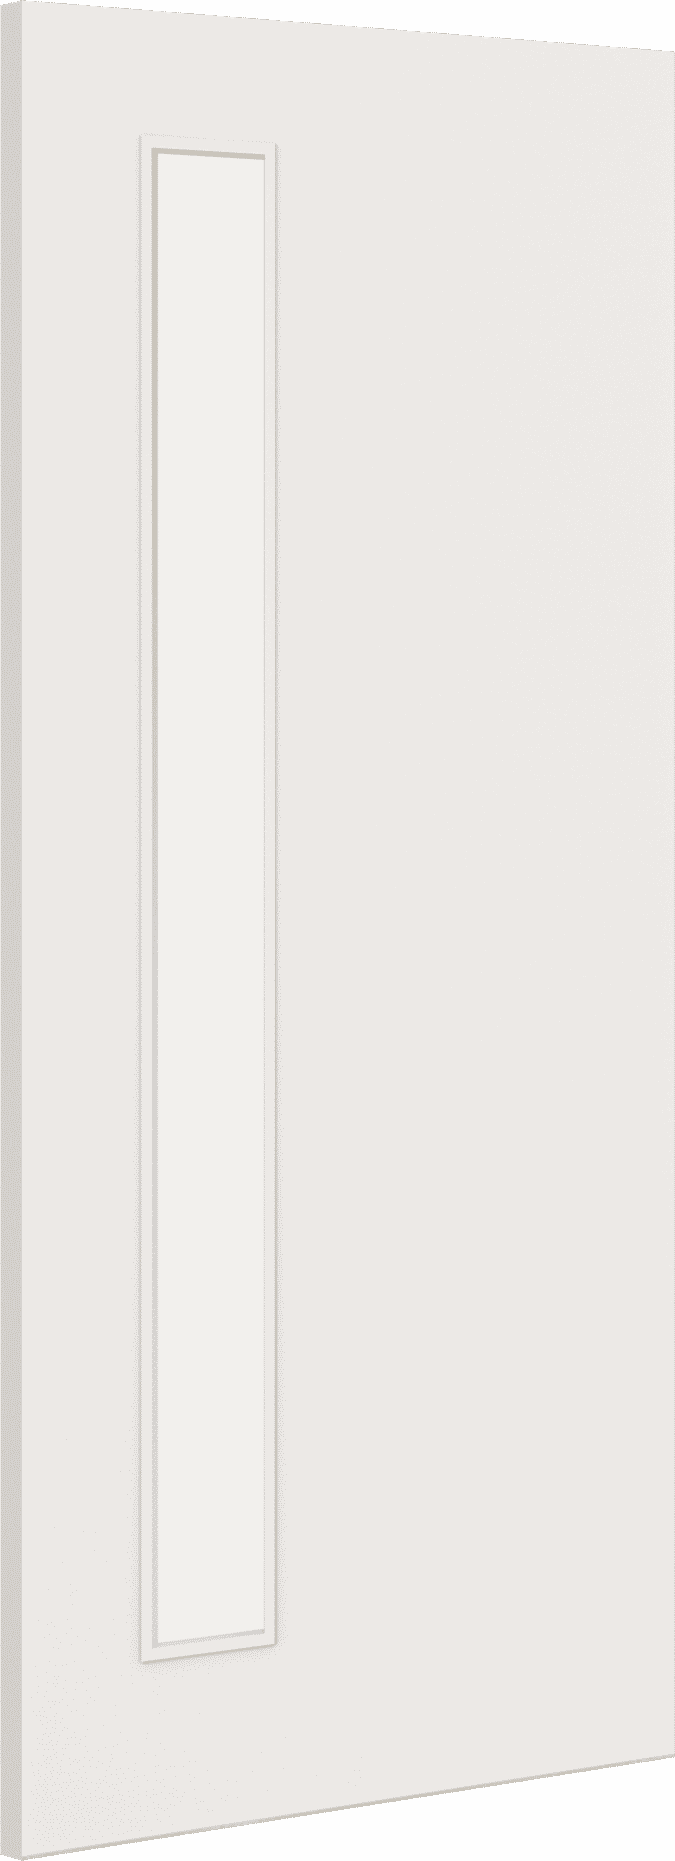 2040mm x 926mm x 44mm Architectural Paint Grade White 06 Frosted Glazed Fire Door Blank